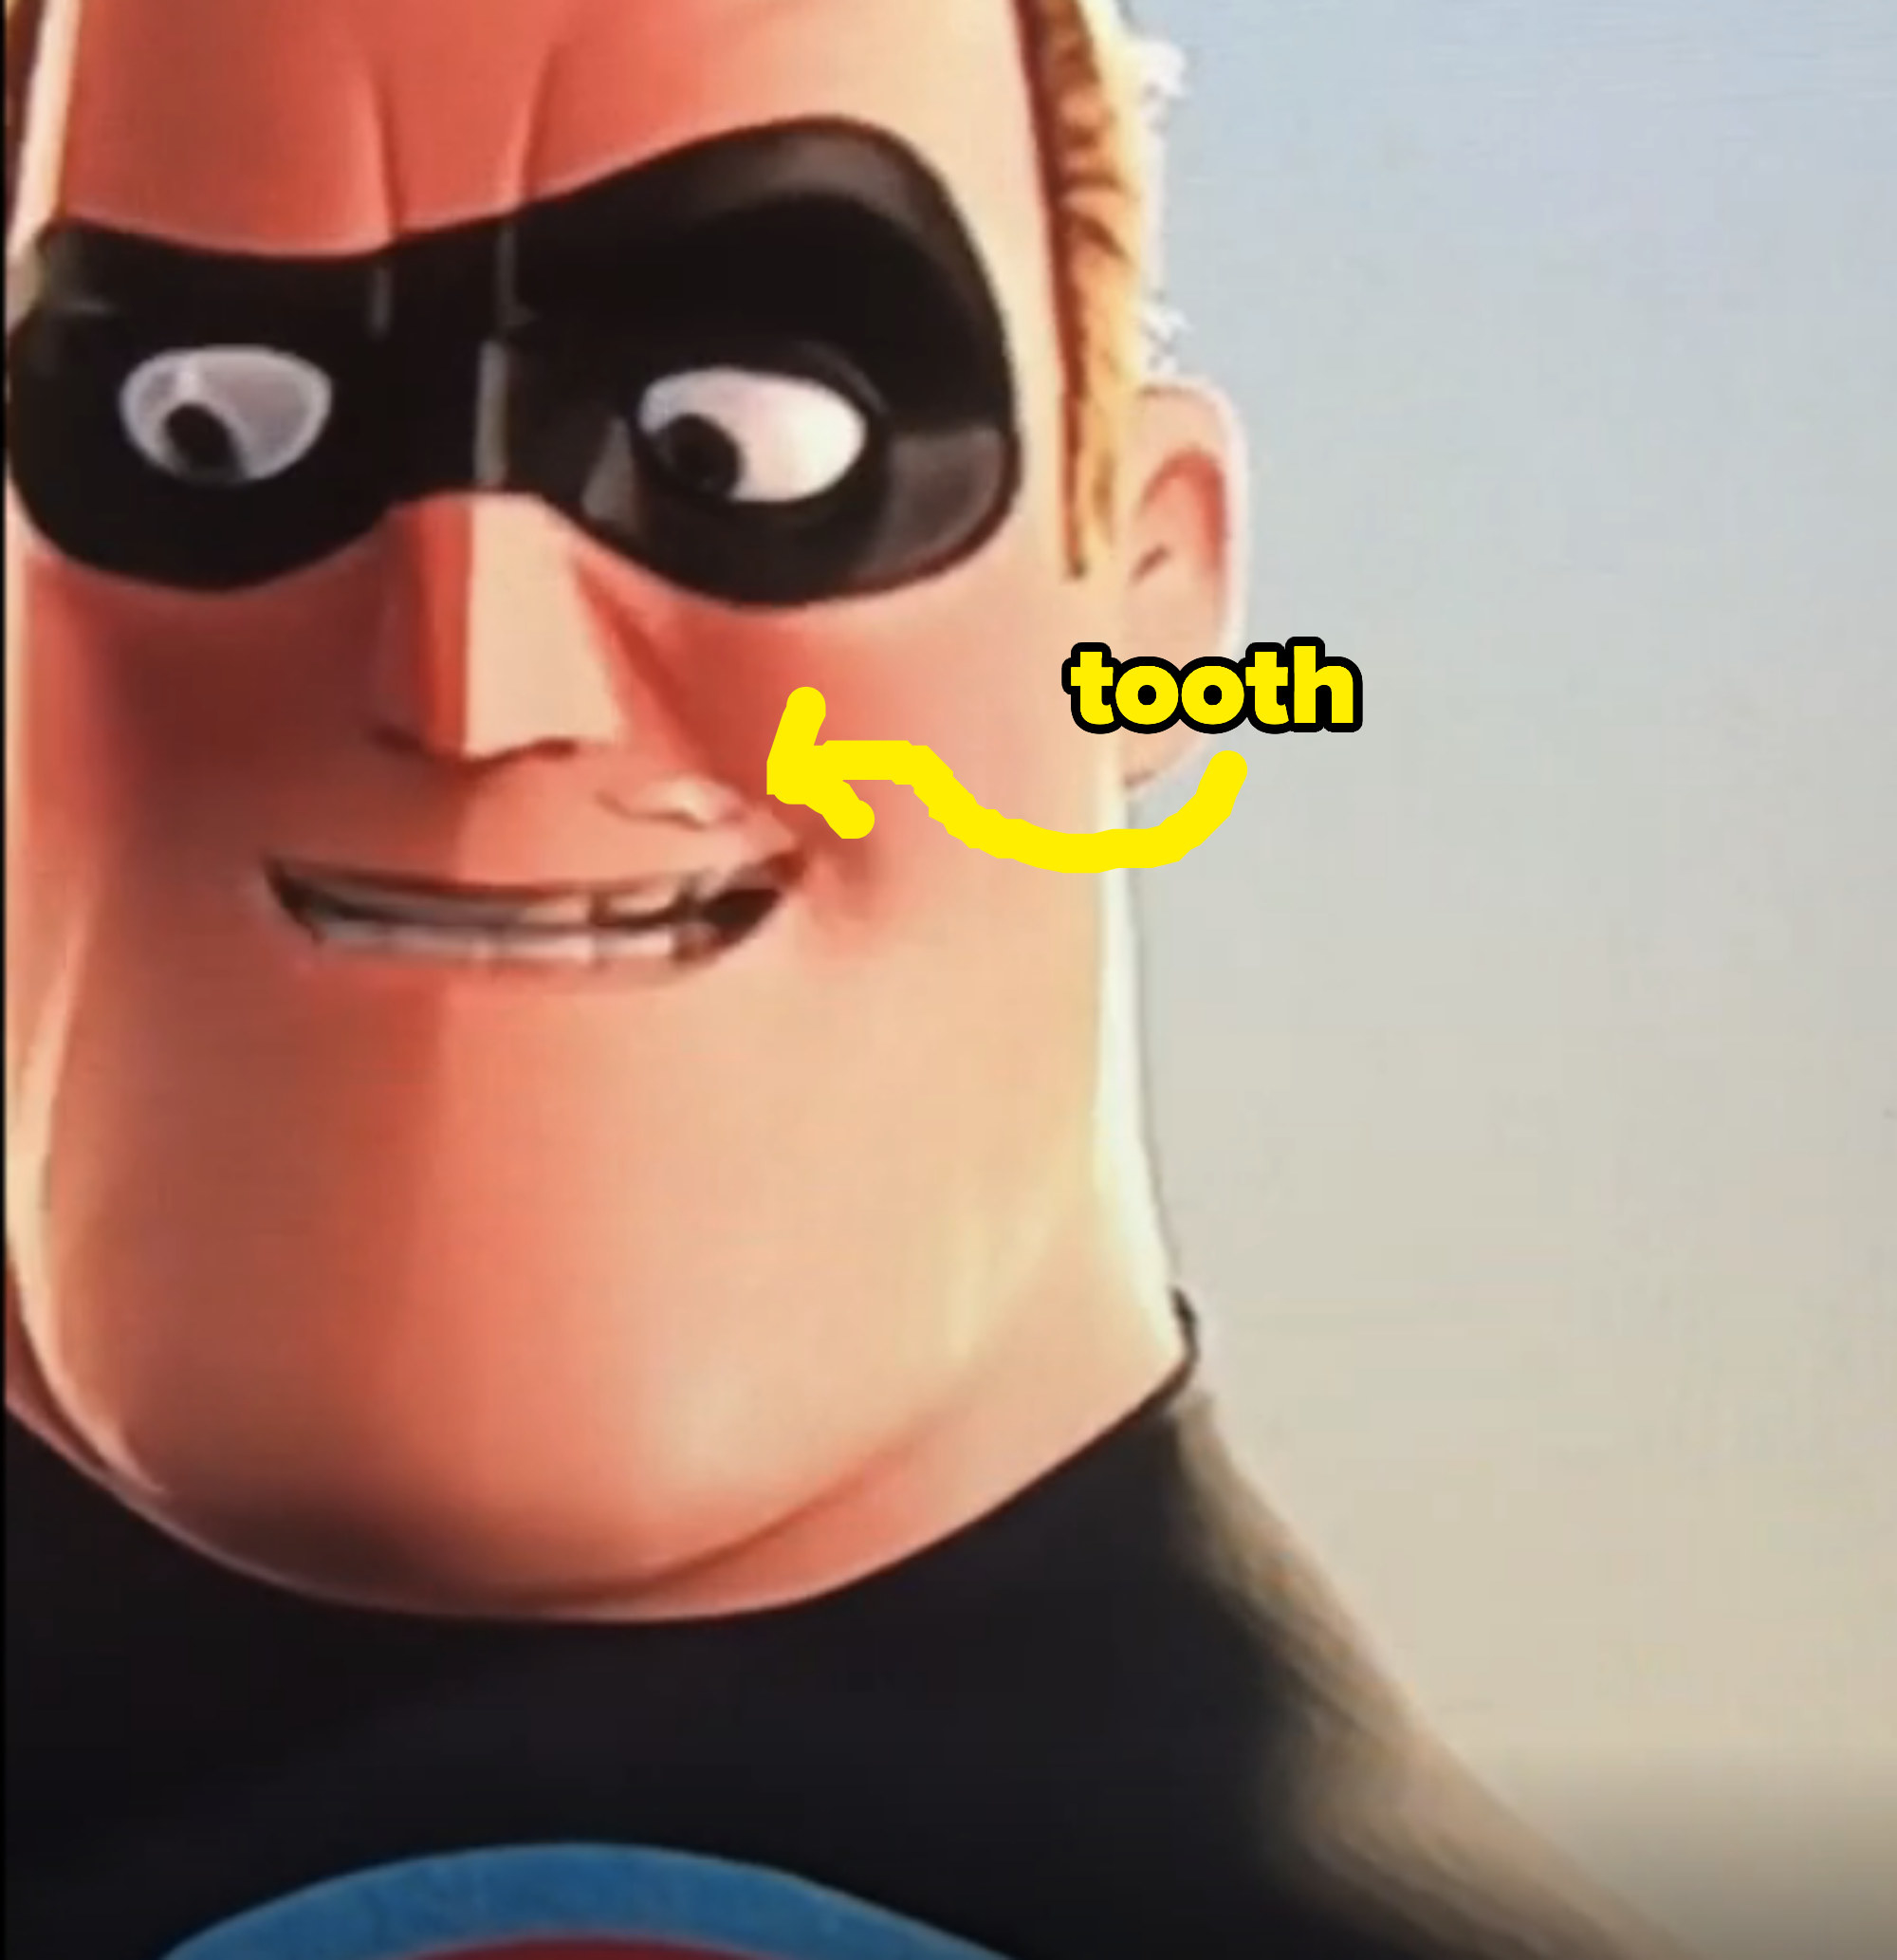 The animation features a split second where a character&#x27;s tooth can be seen on the wrong side of his lip, as if it&#x27;s cutting through his skin